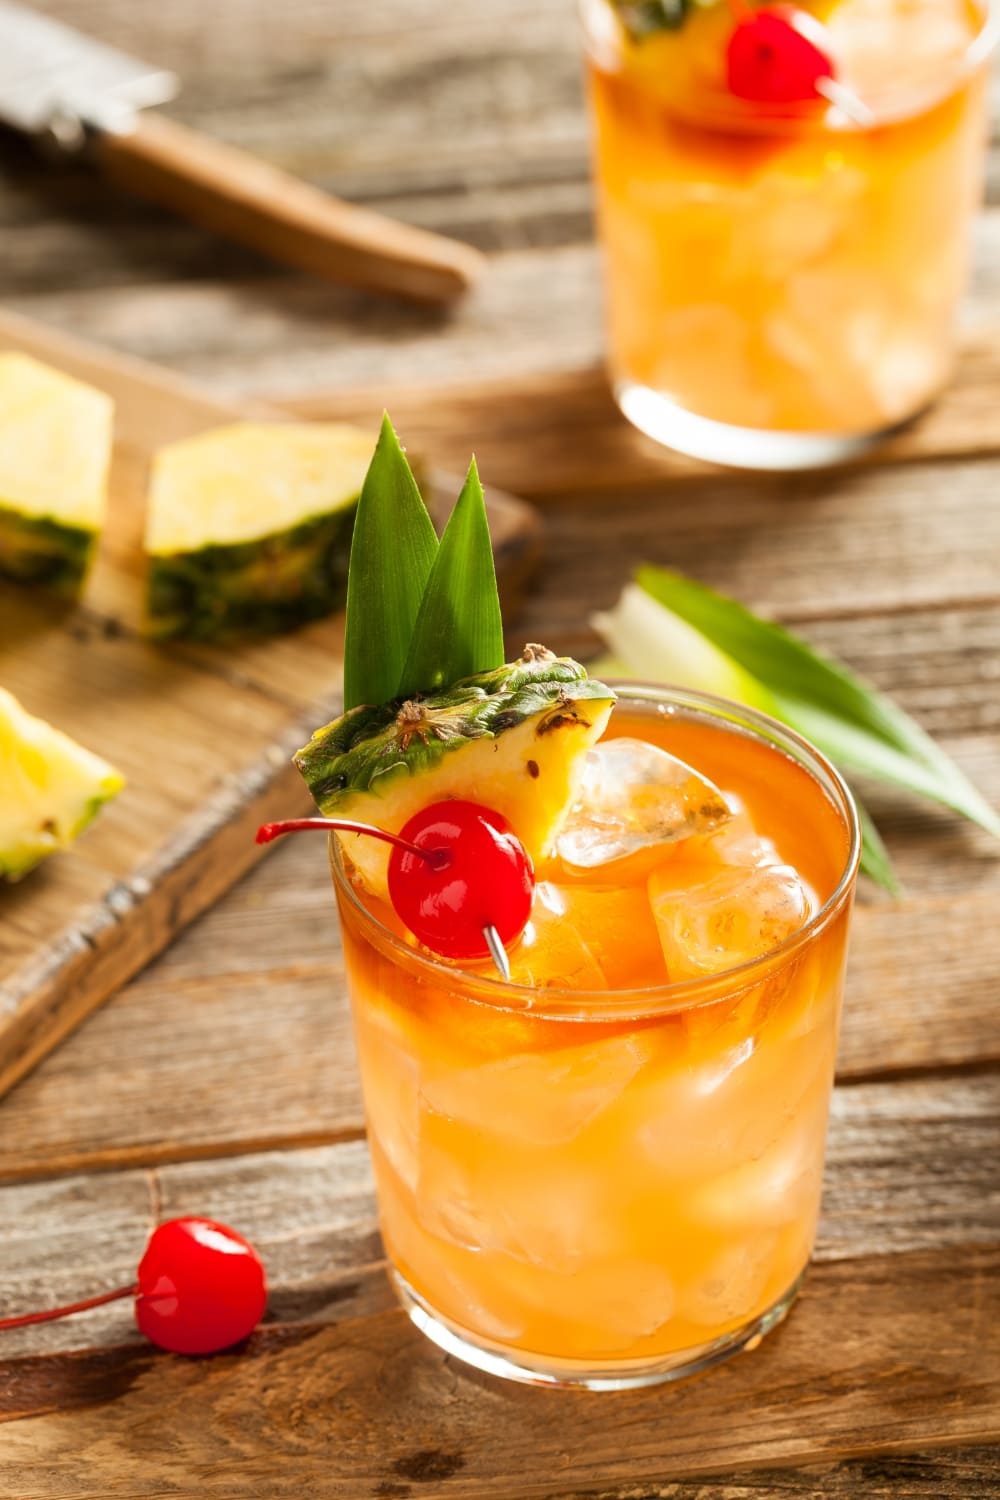 Mai Tai Cocktail Garnished With Pineapple Slices and Cherries on a Wooden Table
